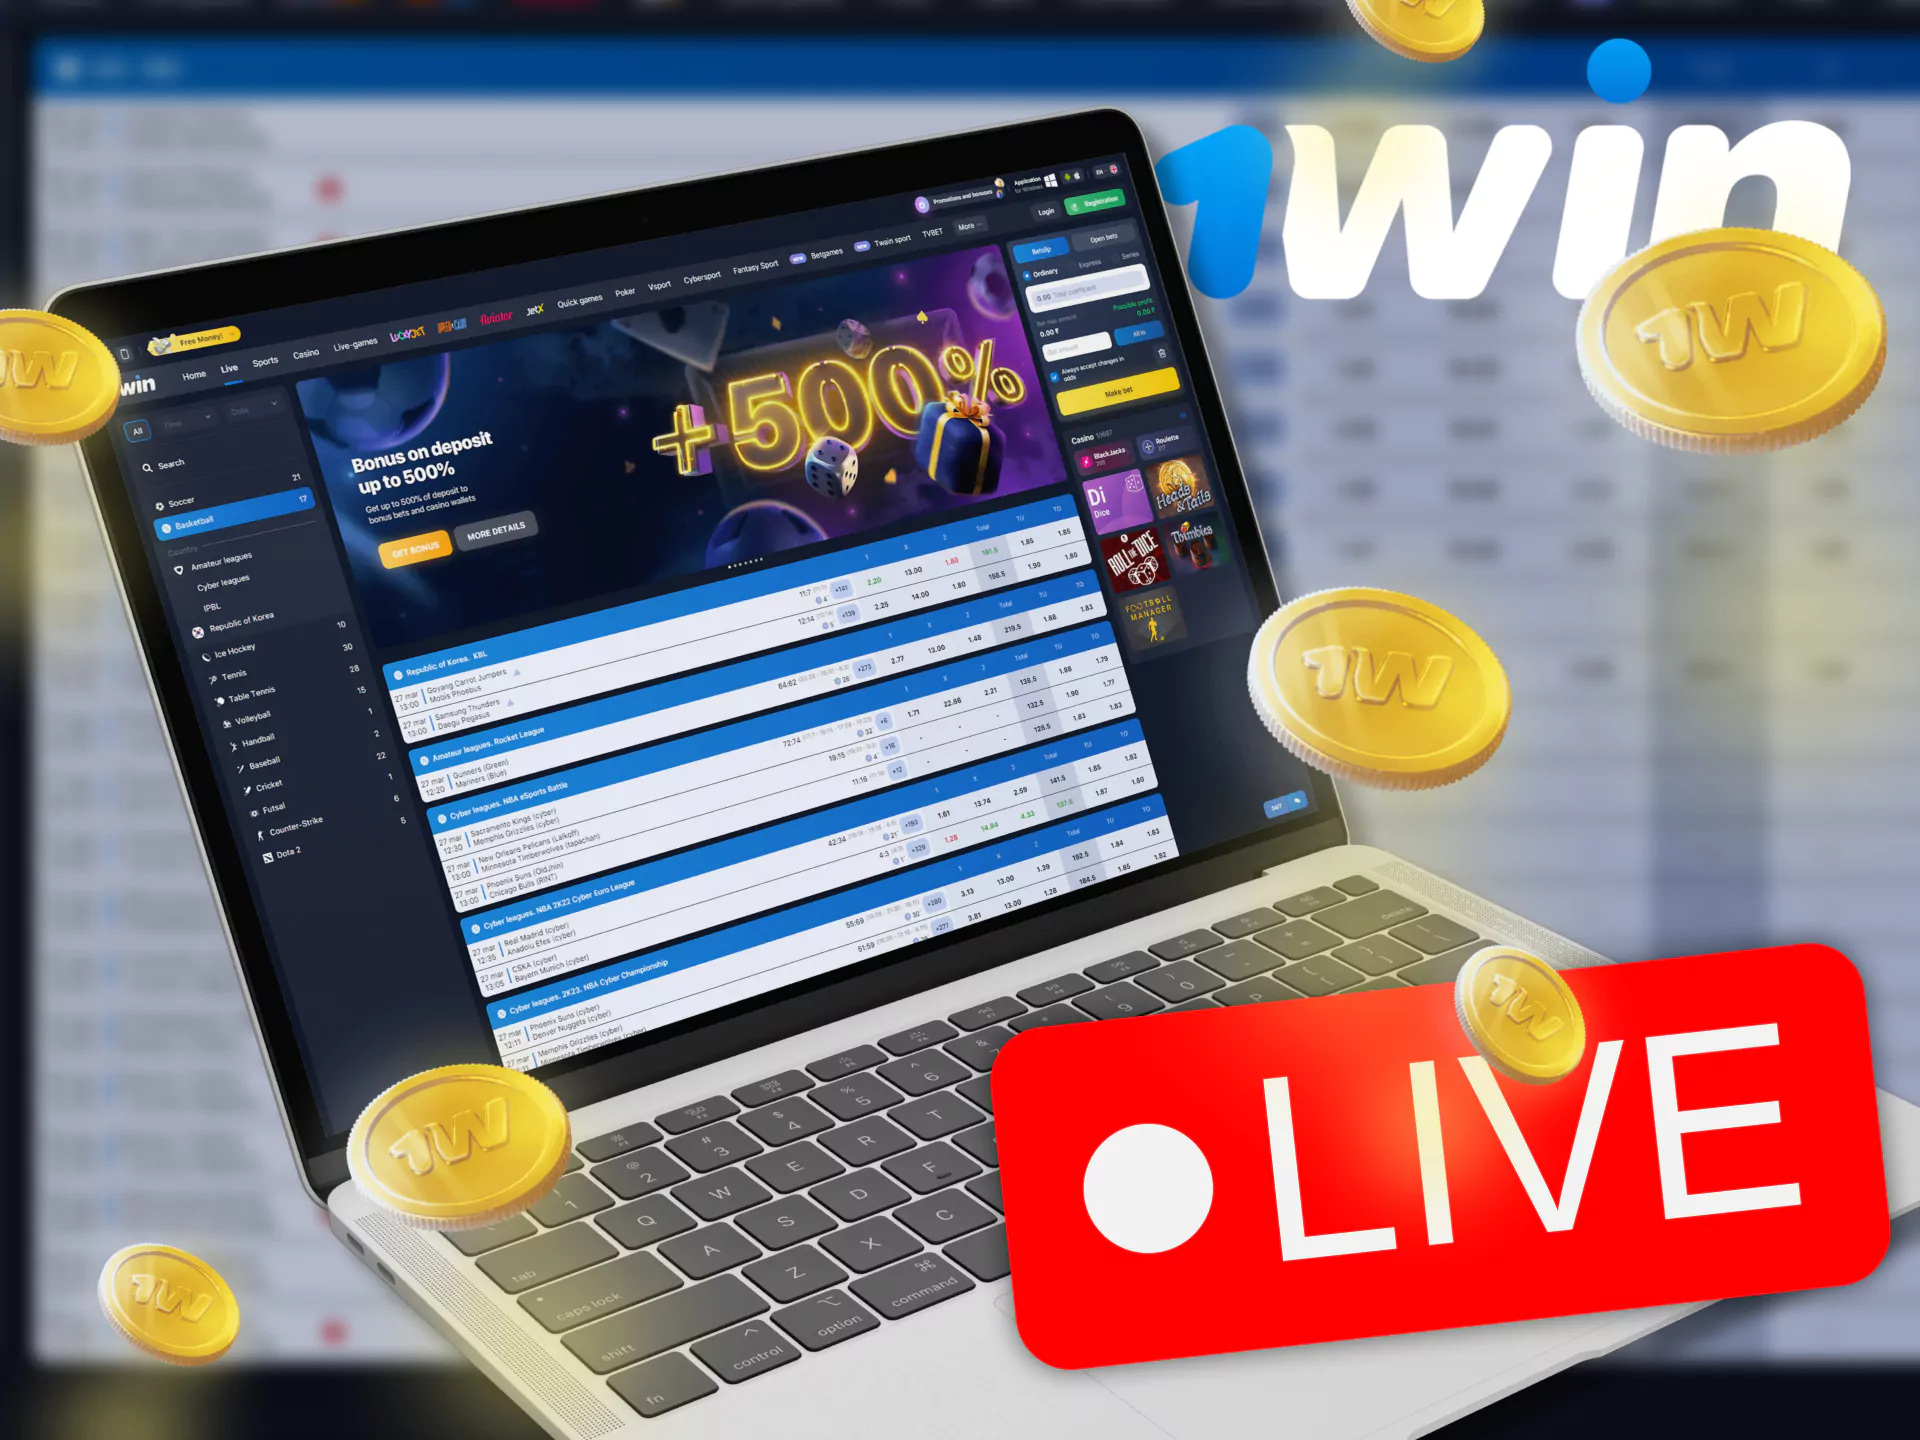 At 1win, you bet on basketball games during live streaming.